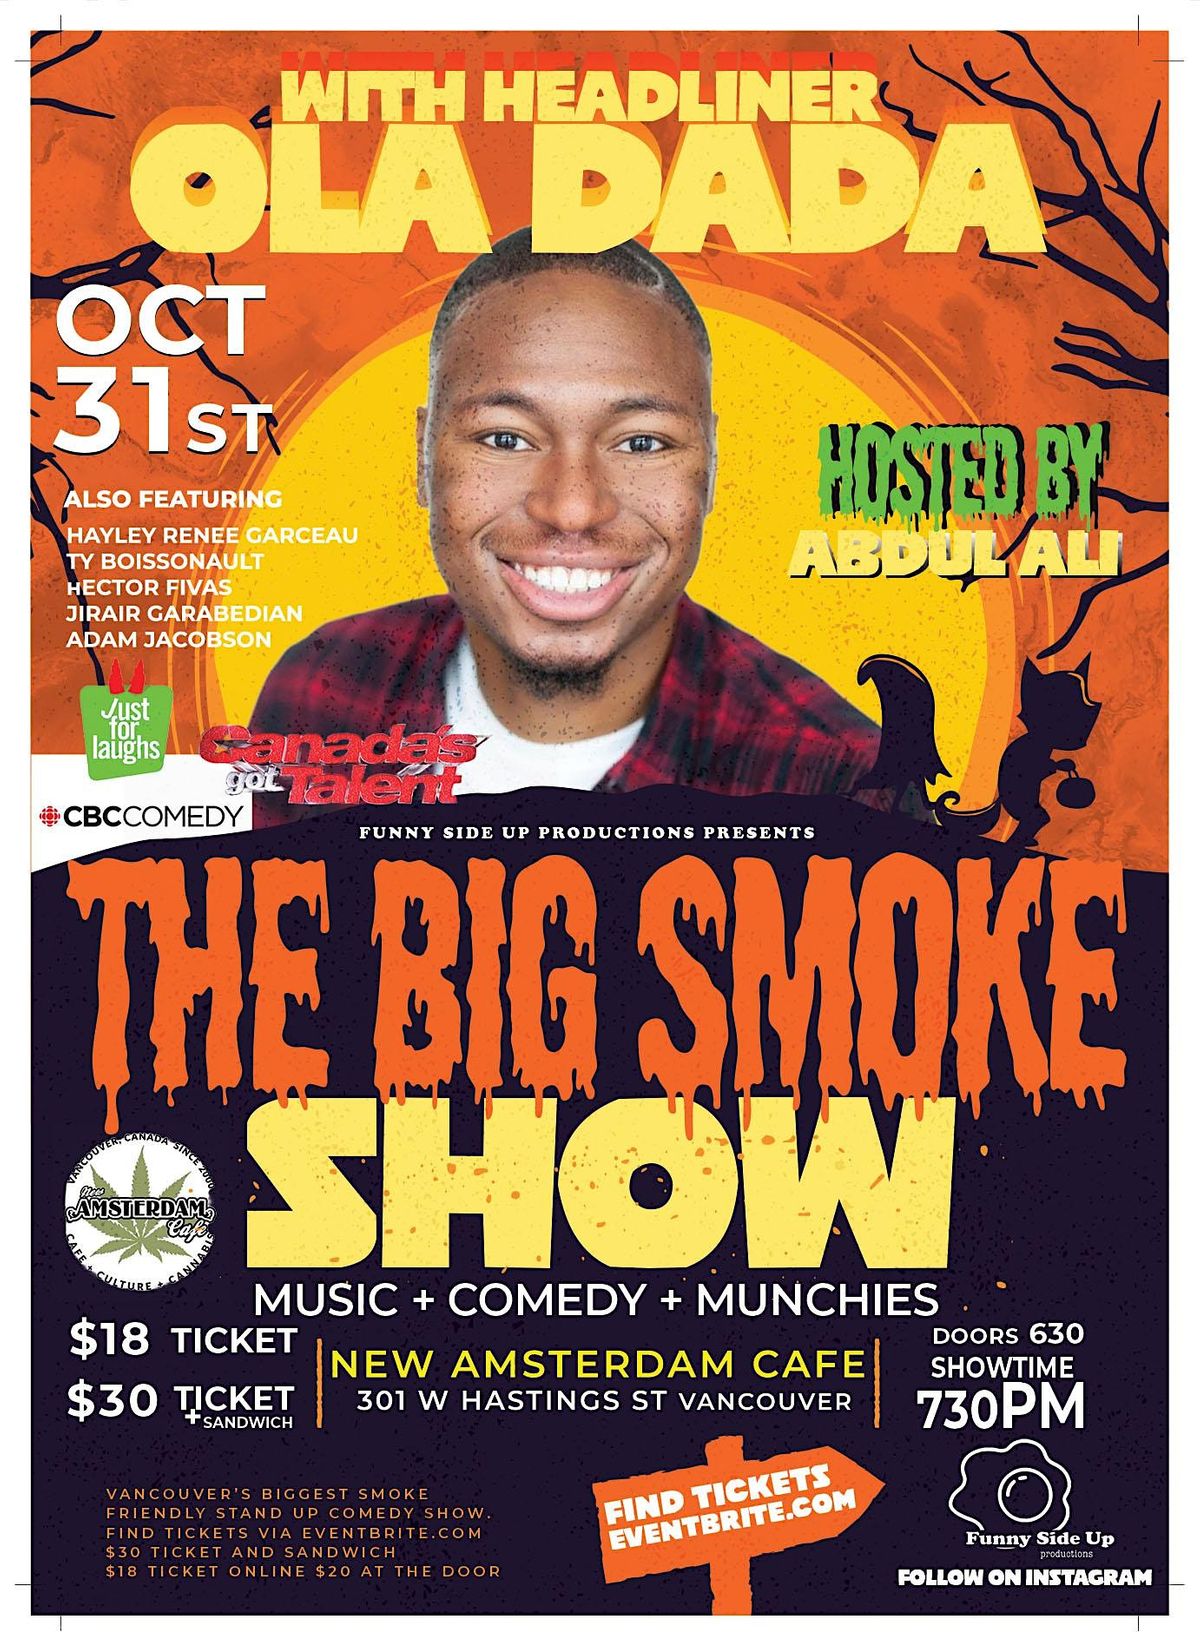 The Big Smoke Show at The New Amsterdam Cafe Halloween Show OCT 31st | New  Amsterdam Cafe, Vancouver, BC | October 31, 2022